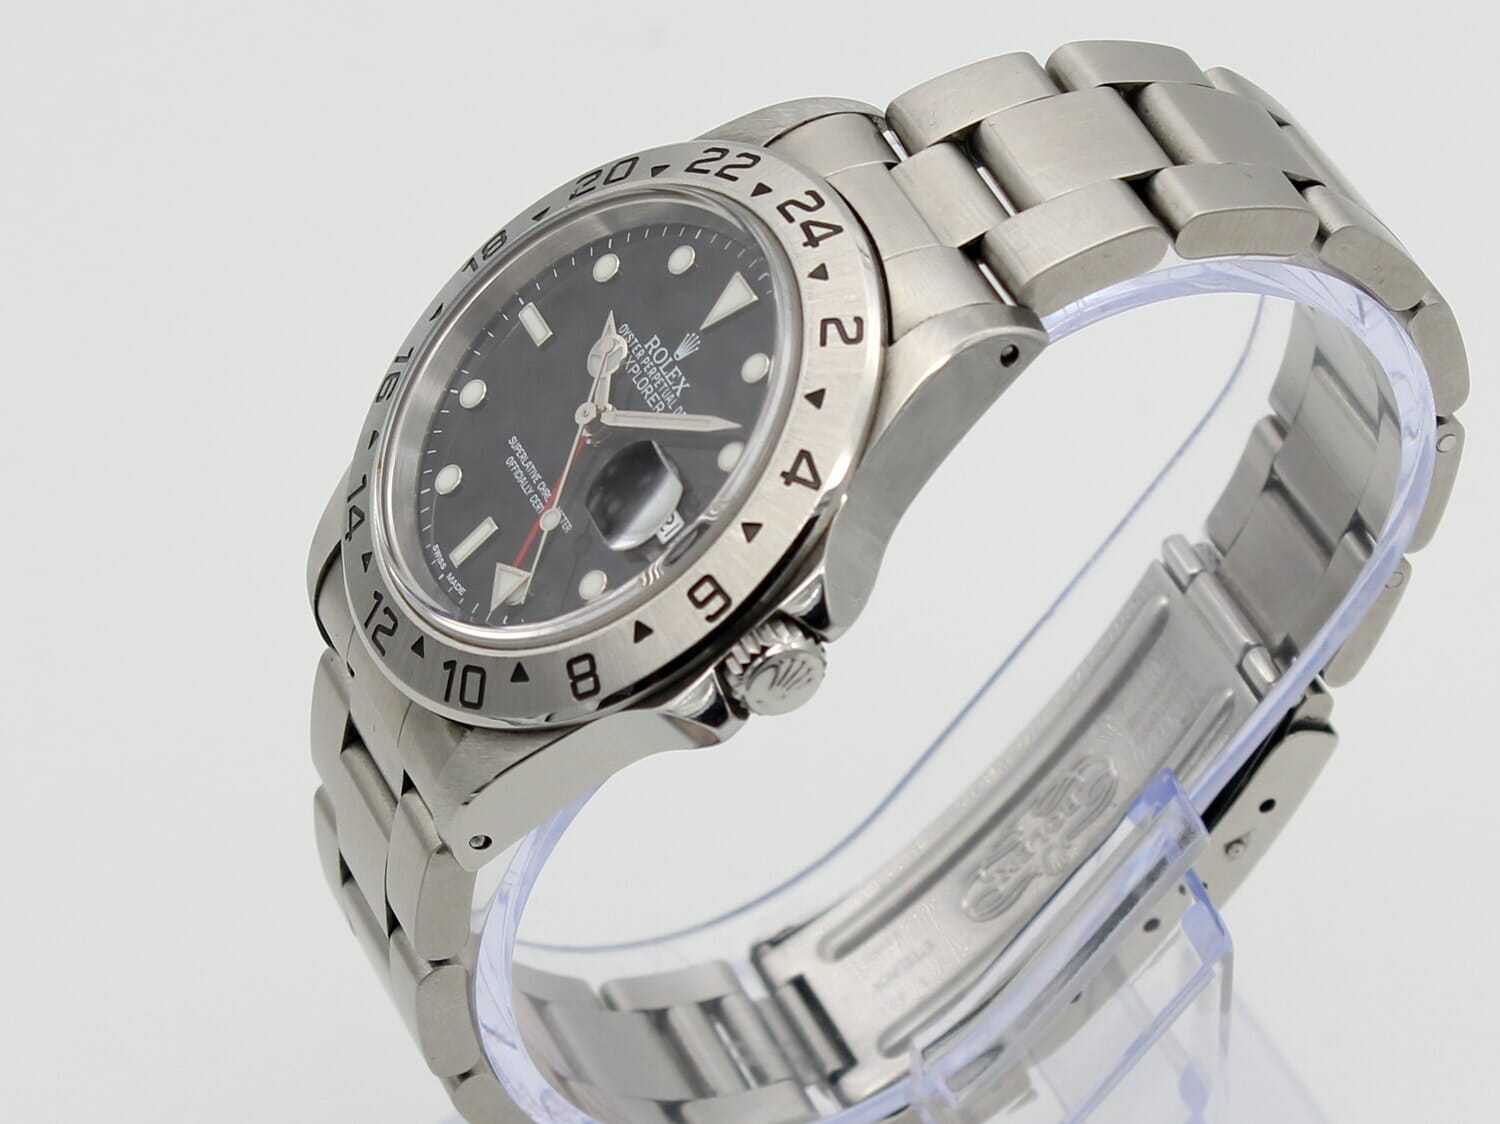 Rolex - 16570 - Explorer 2 - Stainless Steel 40mm - Black Dial - Oyster ...